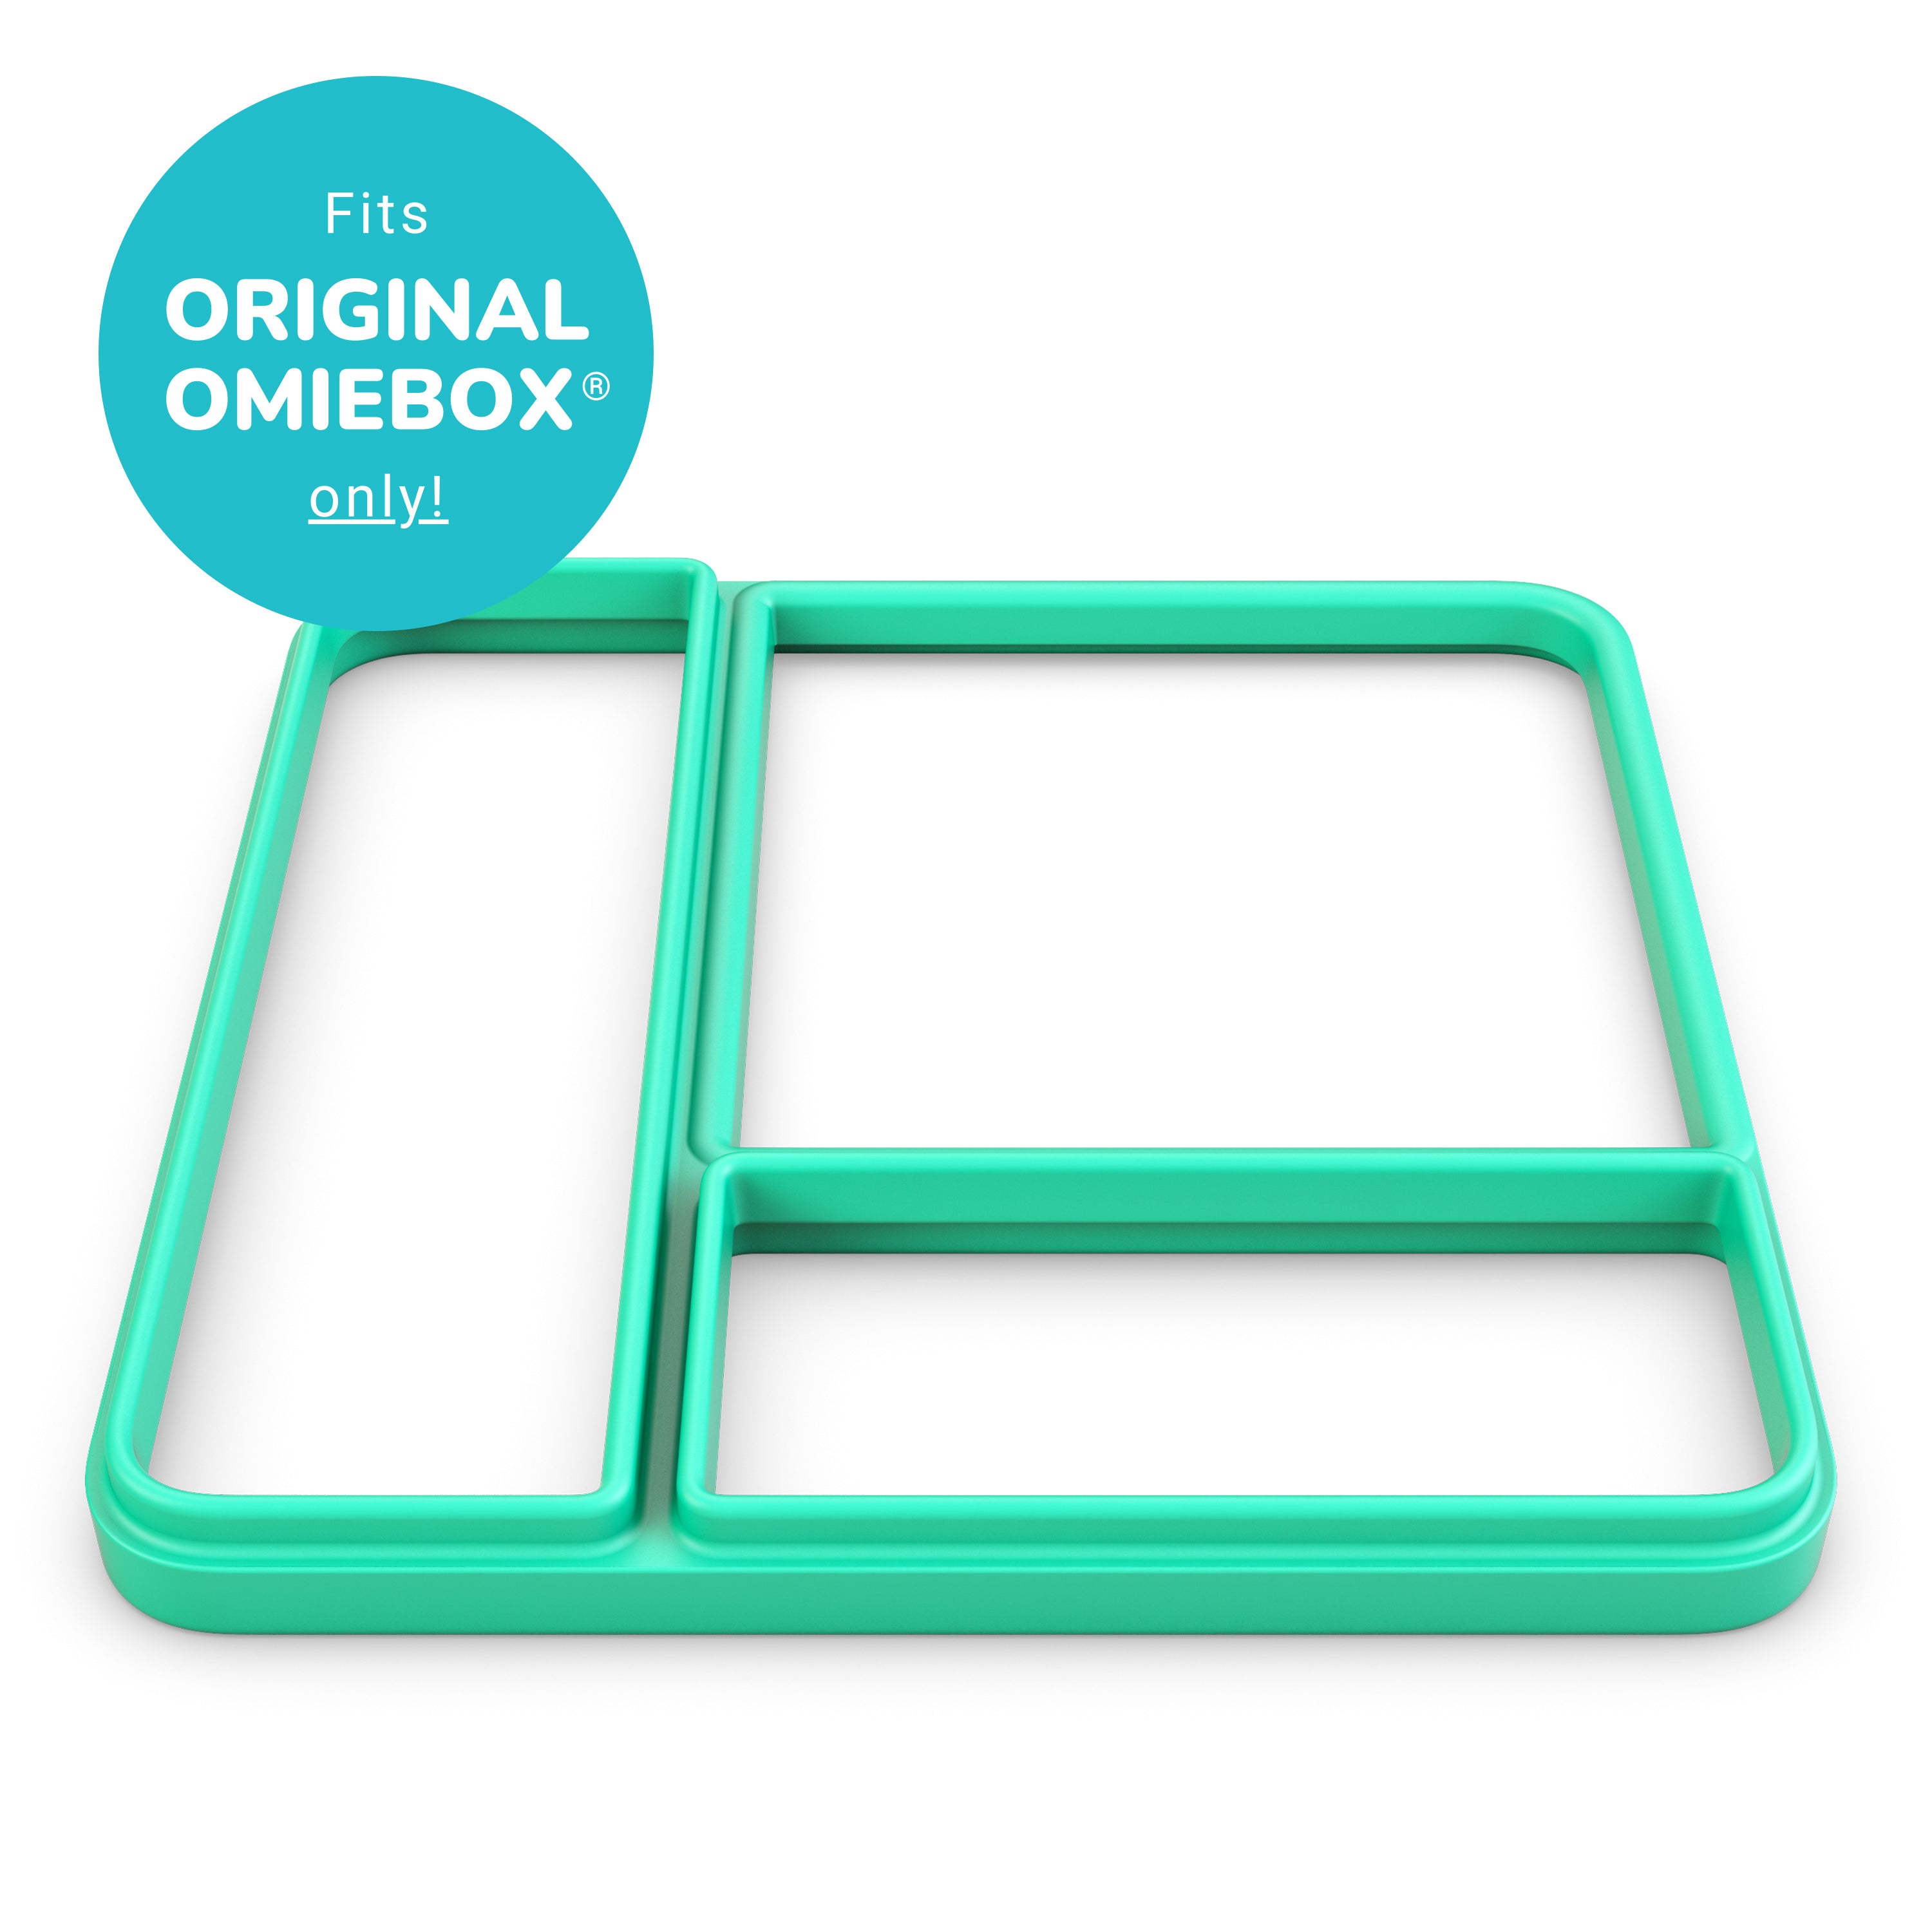 OmieLife - OmieBox V1 Spare Parts are Back in Stock 🤩 Visit the accessories  section on OmieLife.com 👆🏻 #omielife #omiebox #omie #omielove #omiepod  #omiego #backinstock